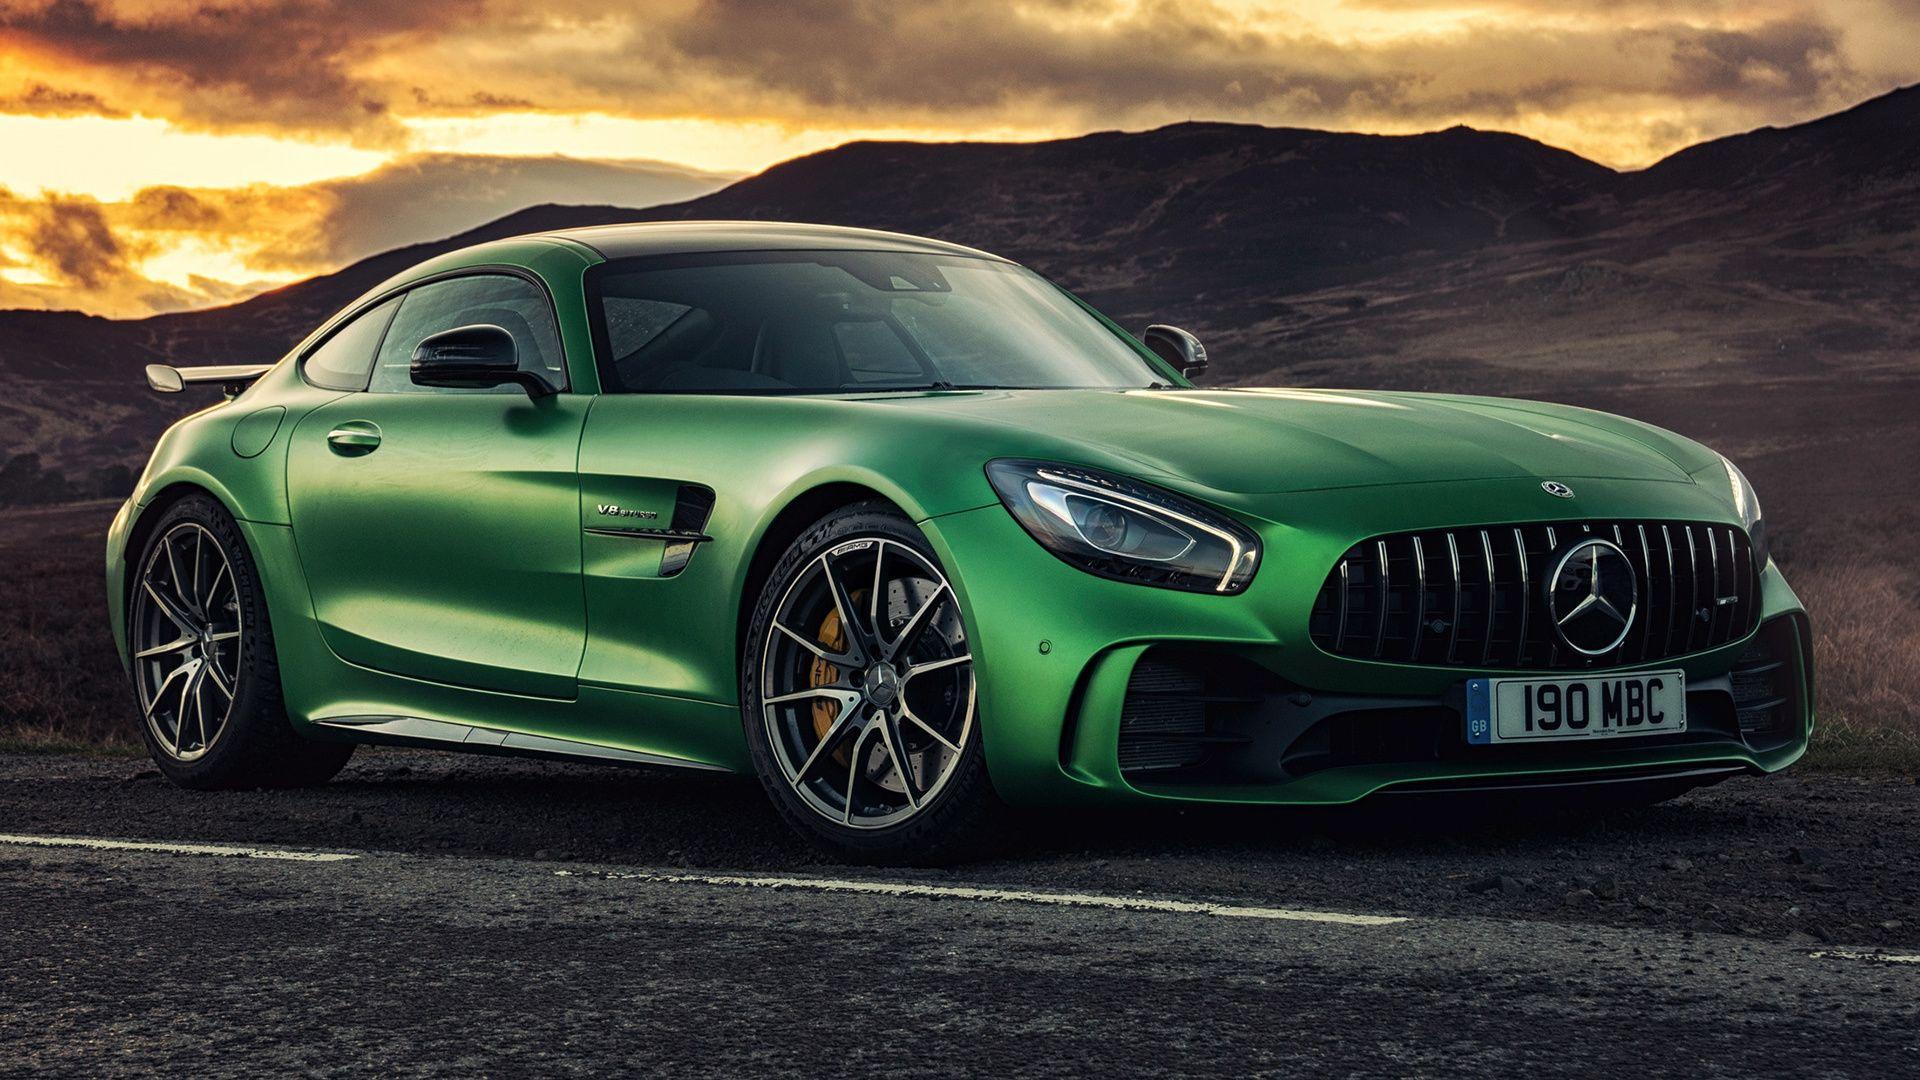 Mercedes AMG GT R (2017) UK Wallpaper And HD Image